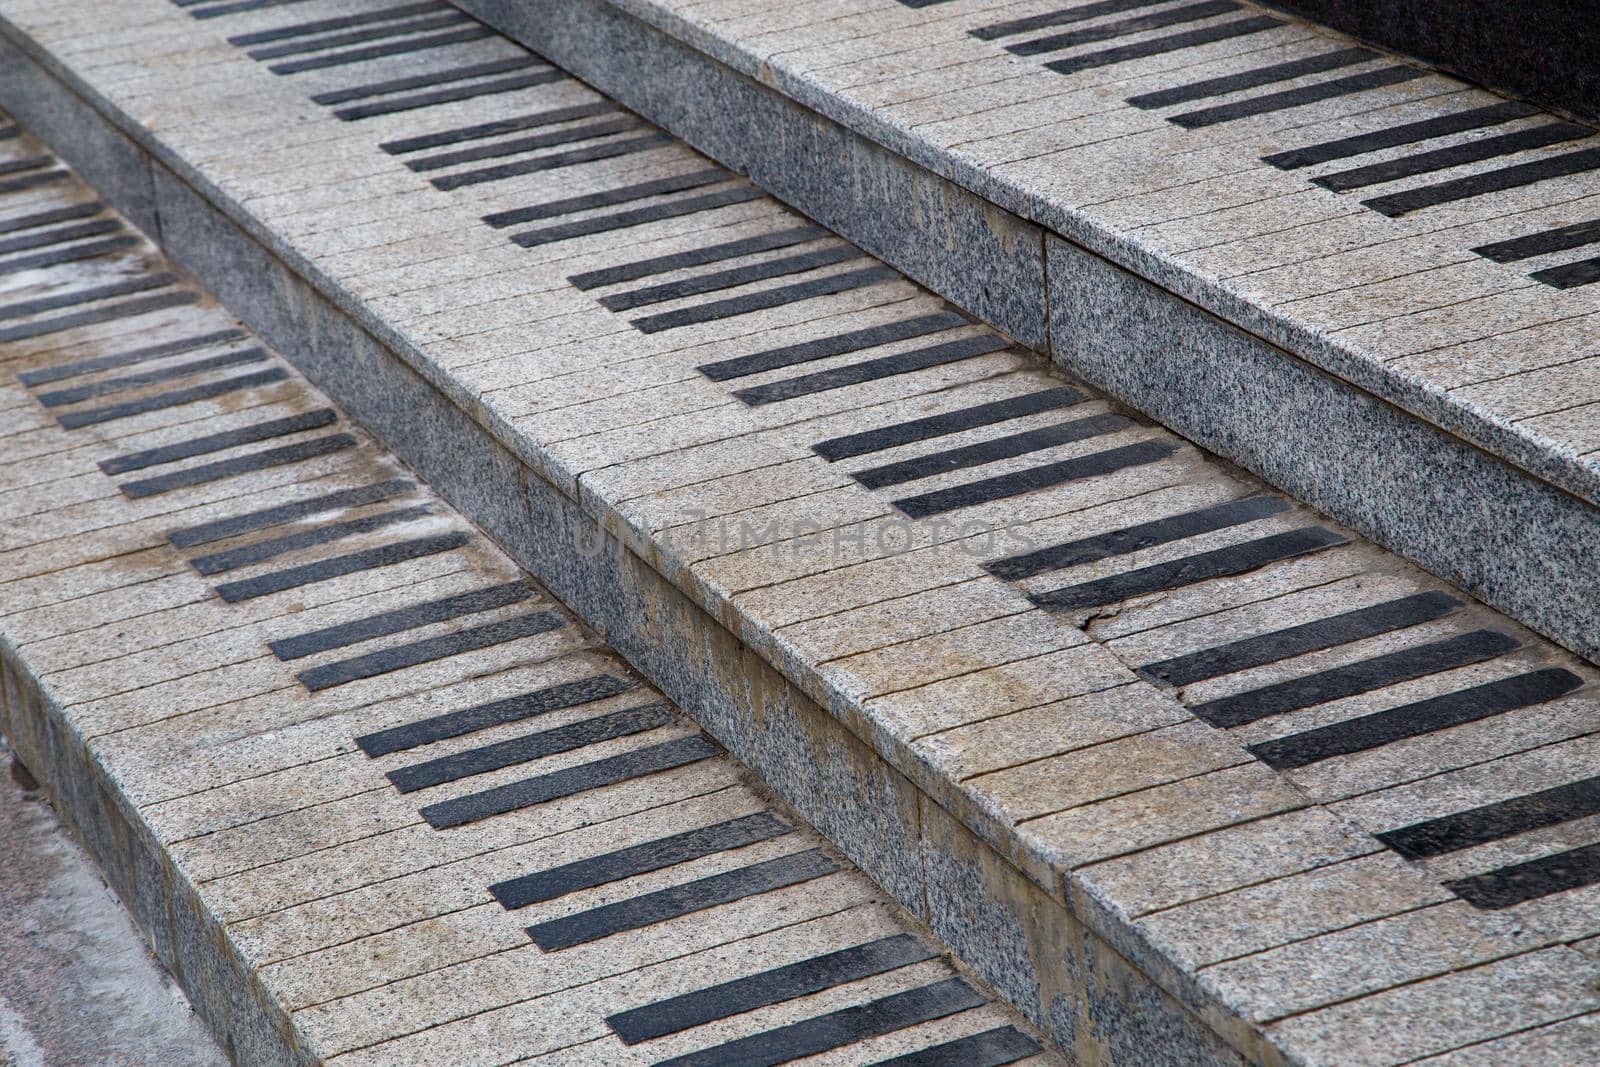 public granite stairs stylised as piano keys - close-up view with diagonal composition